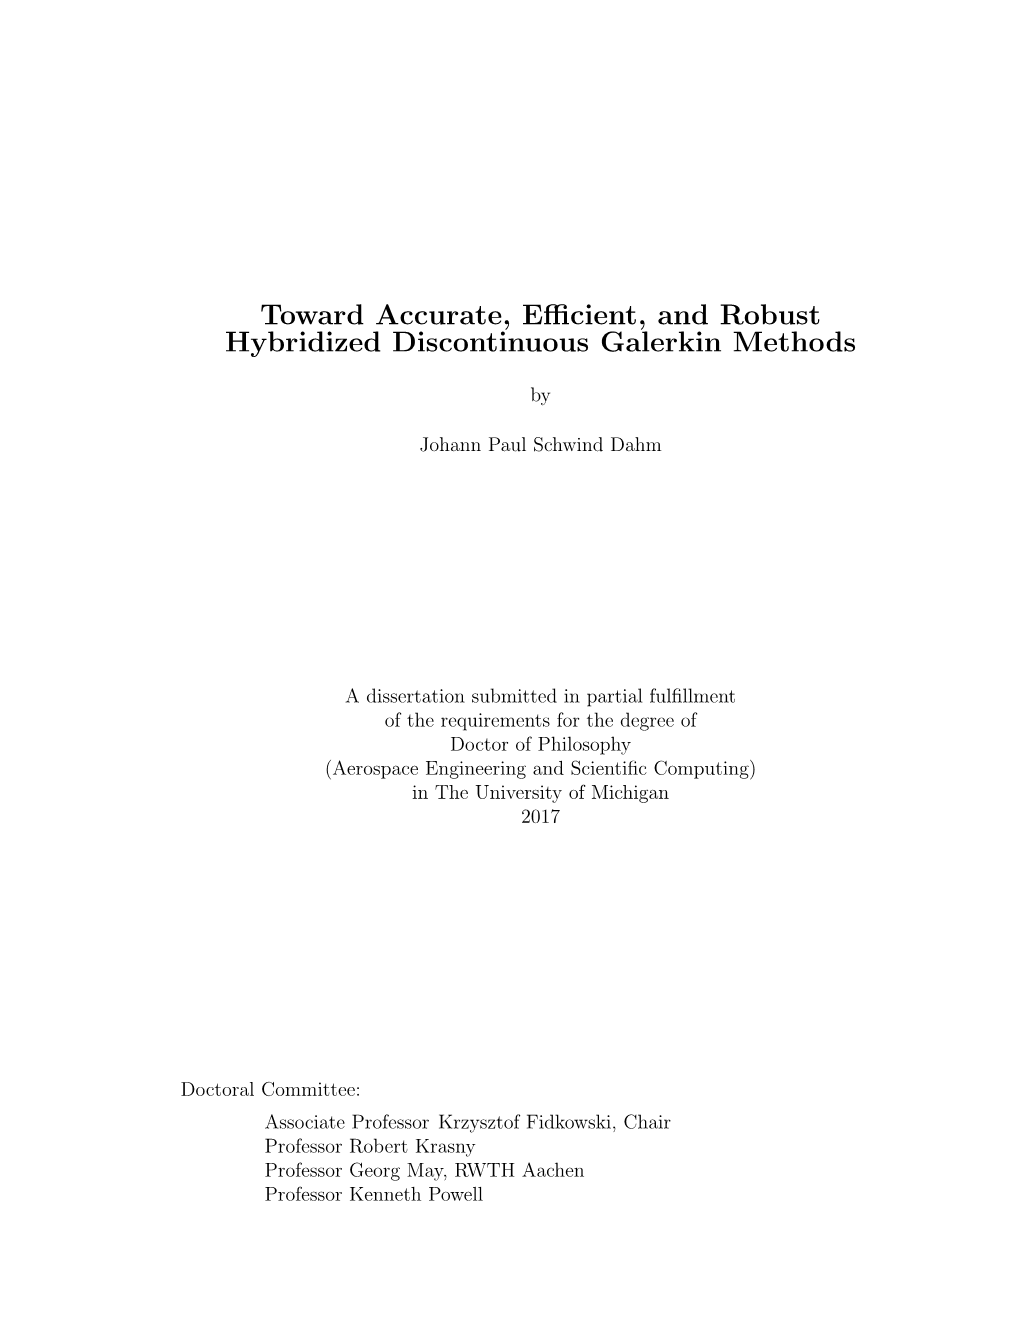 Toward Accurate, Efficient, and Robust Hybridized Discontinuous